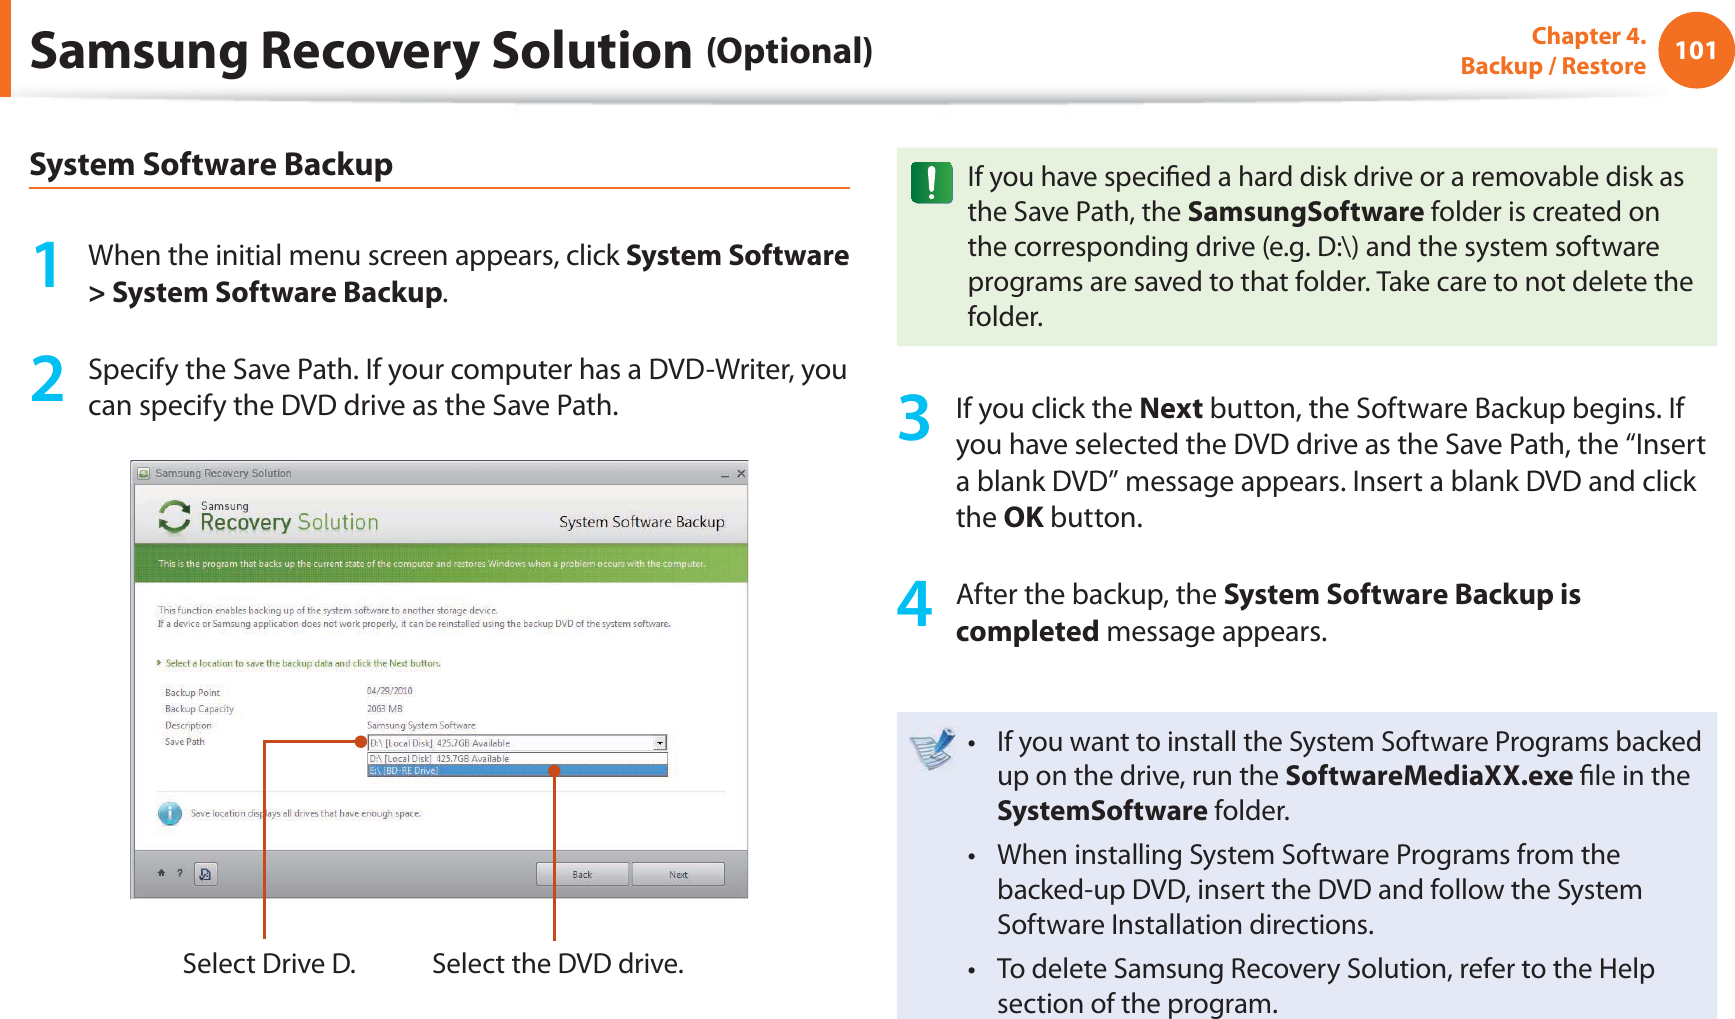 101Chapter 4.  Backup / RestoreSamsung Recovery Solution (Optional)System Software Backup1  When the initial menu screen appears, click System Software &gt; System Software Backup.2  Specify the Save Path. If your computer has a DVD-Writer, you can specify the DVD drive as the Save Path.Select Drive D. Select the DVD drive.If you have speci ed a hard disk drive or a removable disk as the Save Path, the SamsungSoftware folder is created on the corresponding drive (e.g. D:\) and the system software programs are saved to that folder. Take care to not delete the folder. 3  If you click the Next button, the Software Backup begins. If you have selected the DVD drive as the Save Path, the “Insert a blank DVD” message appears. Insert a blank DVD and click the OK button.4  After the backup, the System Software Backup is completed message appears.If you want to install the System Software Programs backed t up on the drive, run the SoftwareMediaXX.exe  le in the SystemSoftware folder.When installing System Software Programs from the t backed-up DVD, insert the DVD and follow the System Software Installation directions.To delete Samsung Recovery Solution, refer to the Help t section of the program.